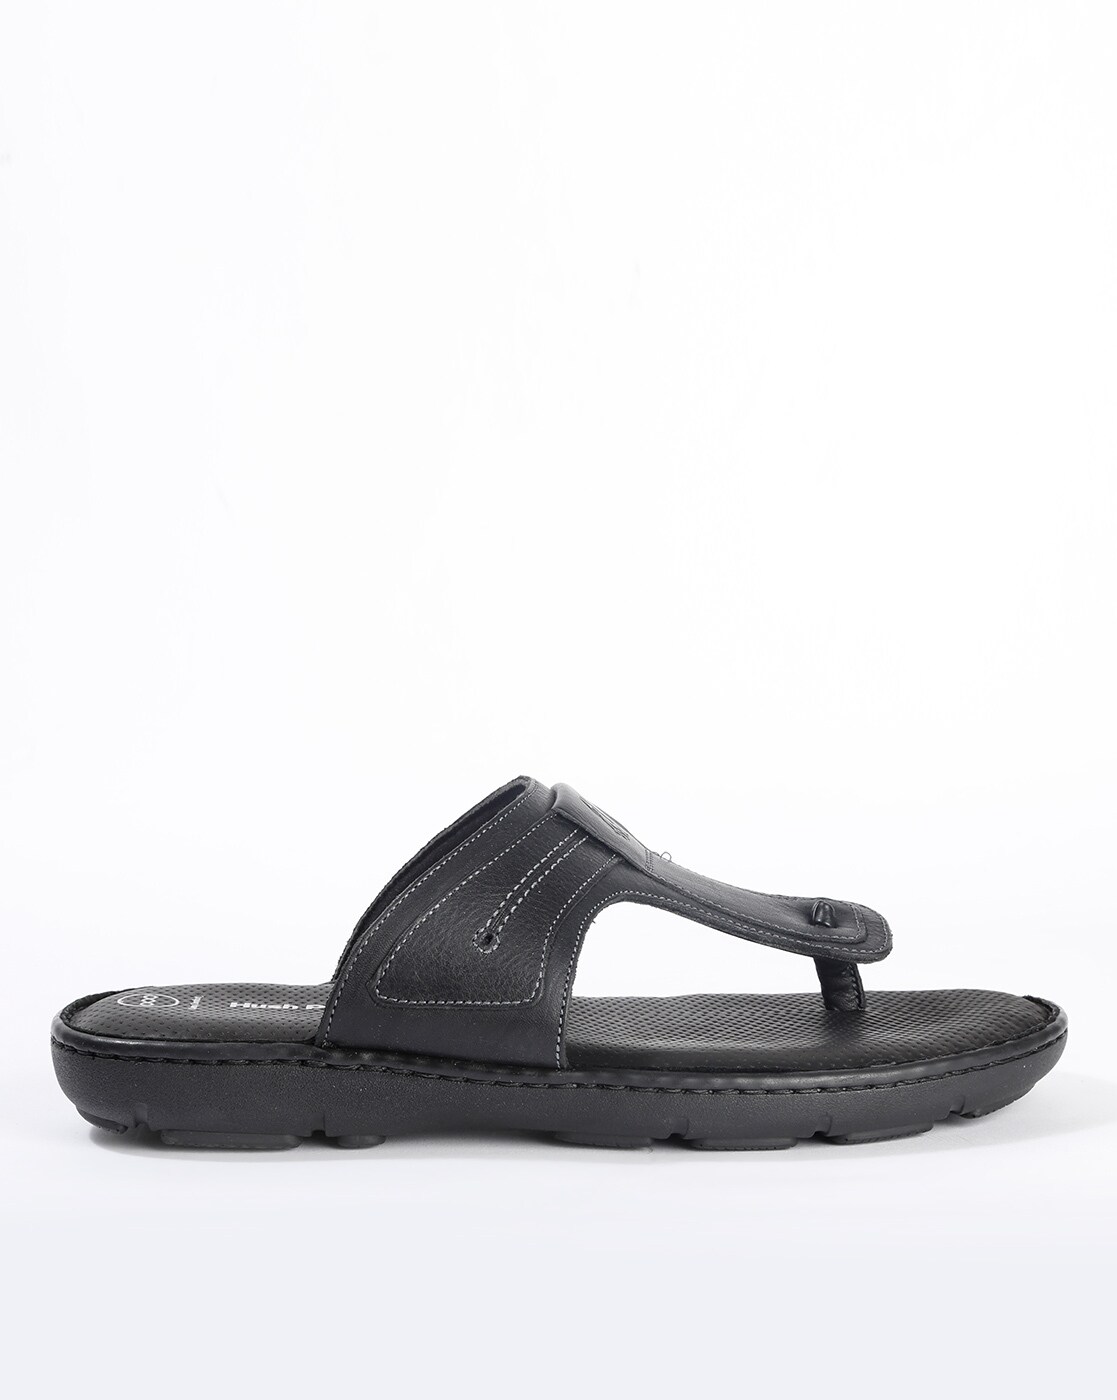 Buy Black Flip & Slippers for by HUSH PUPPIES Online | Ajio.com